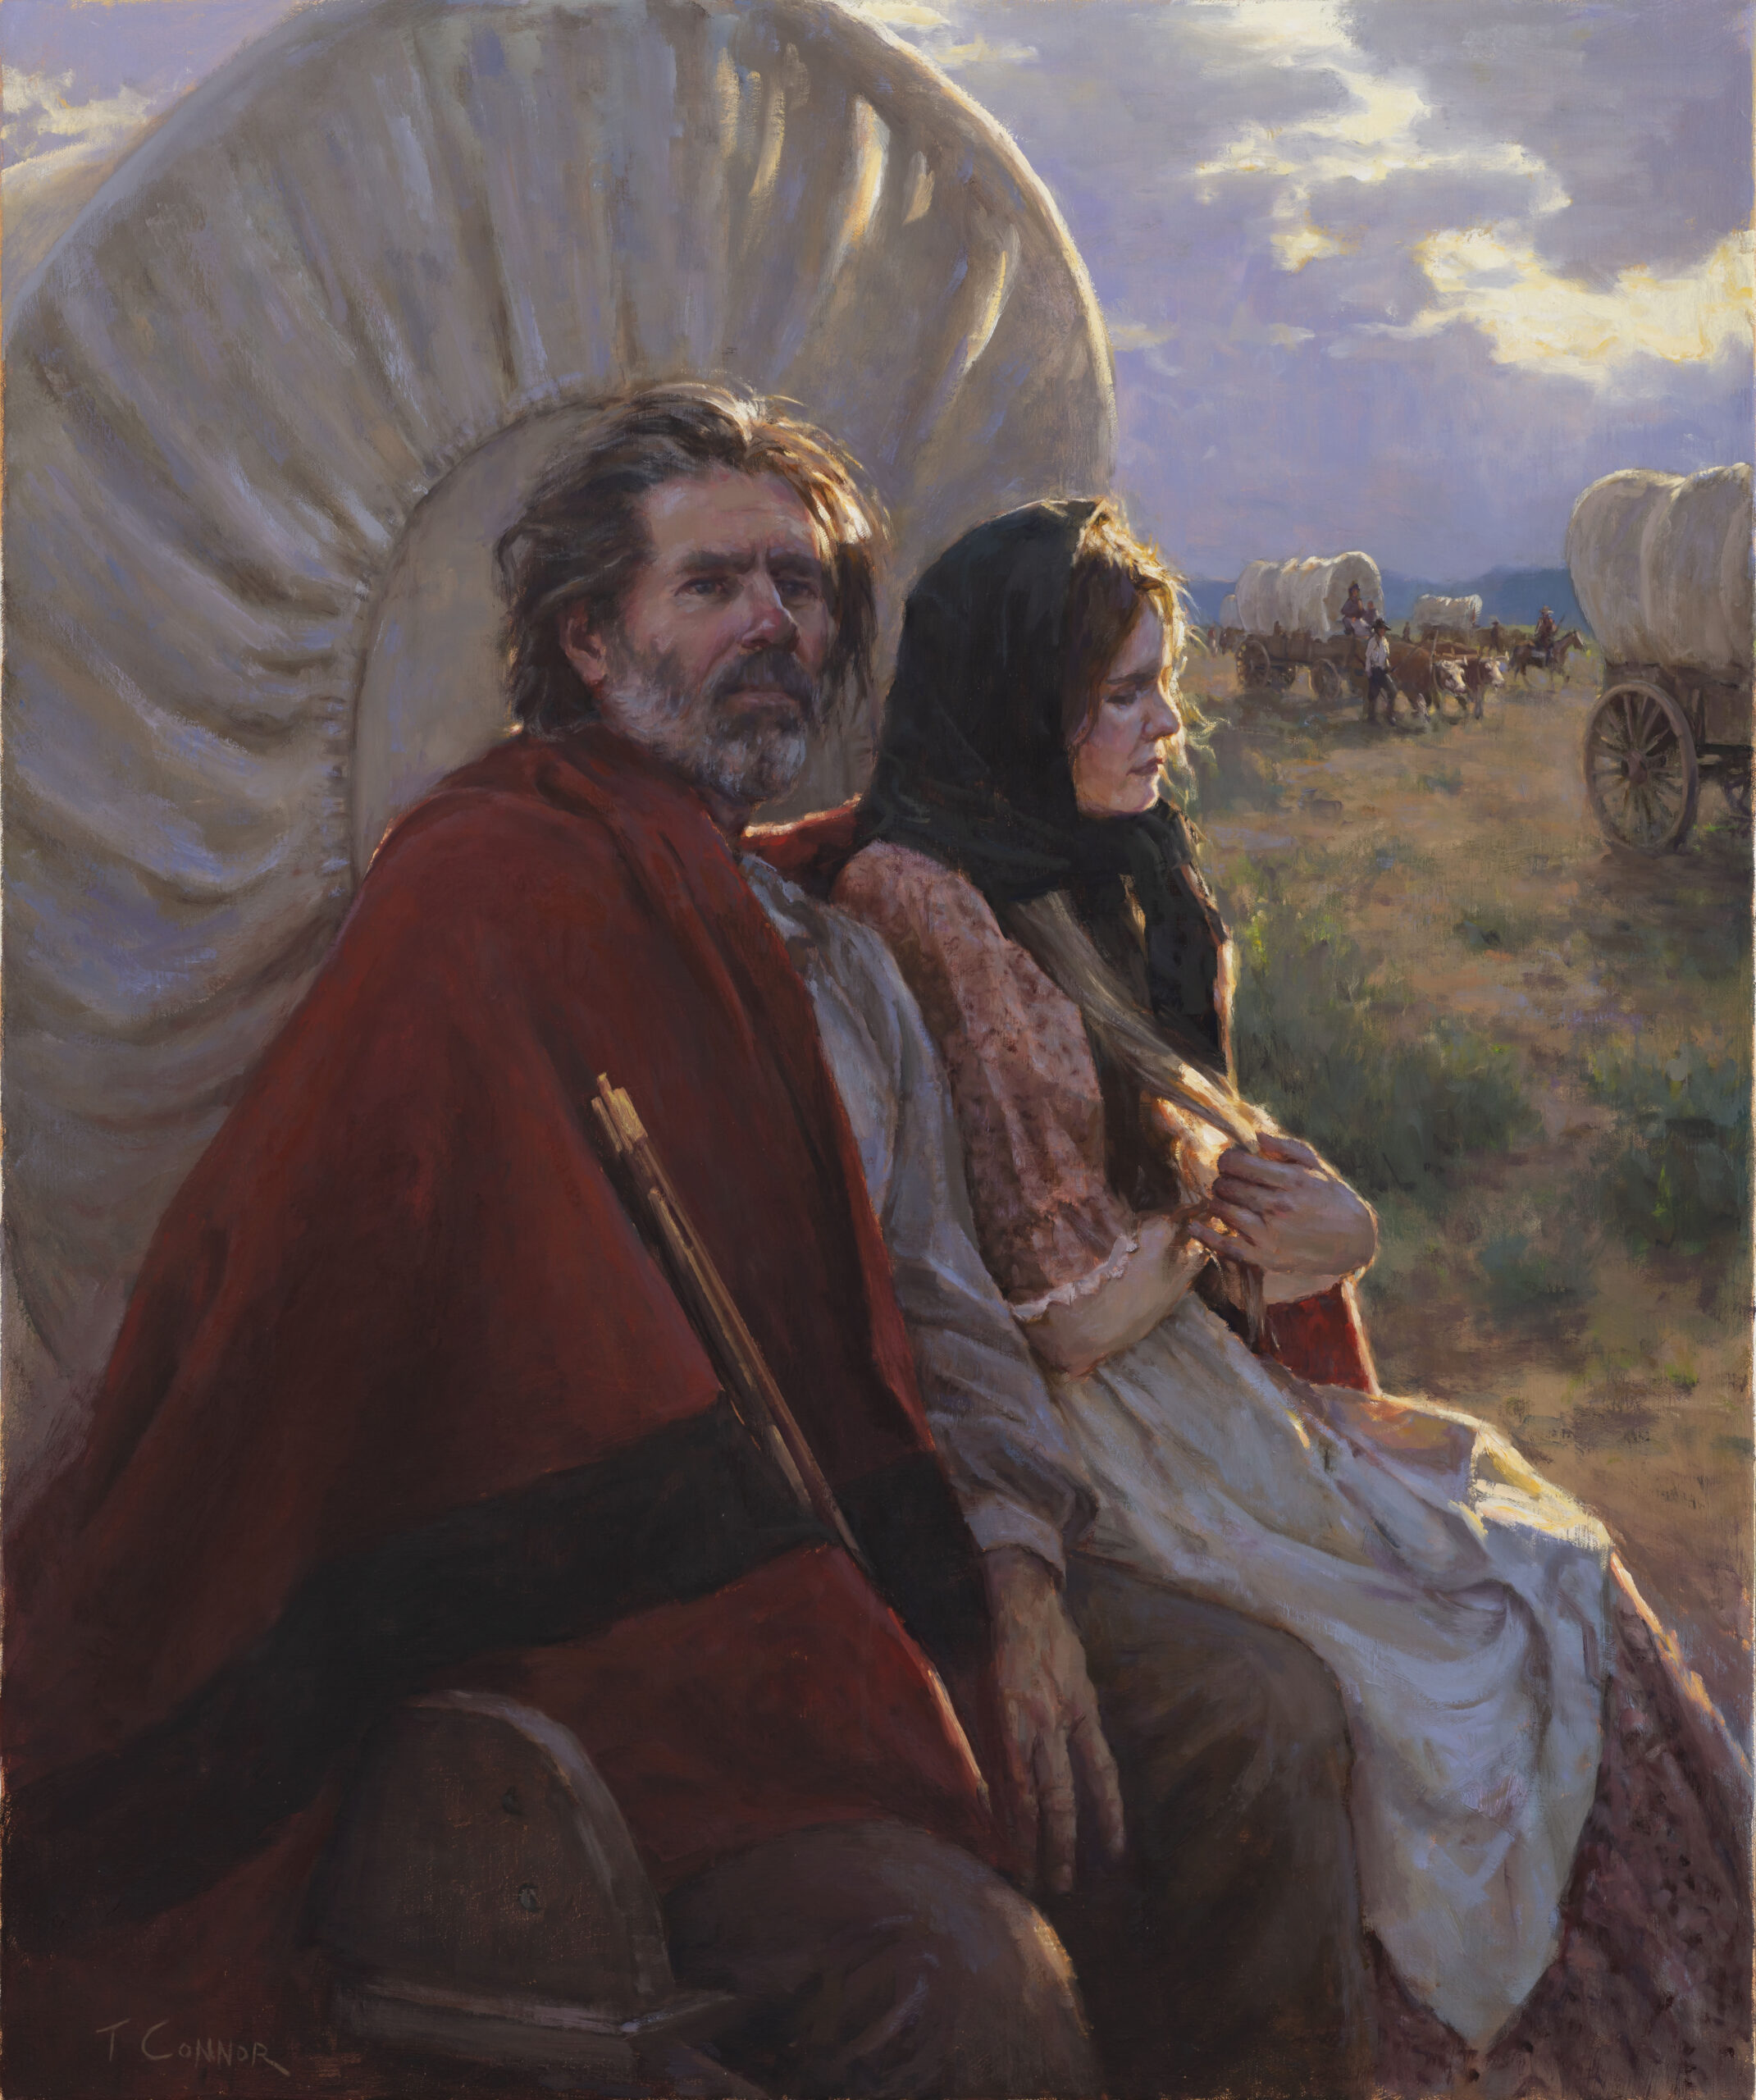 Western Art - Todd Connor, “The Widow and the Widower,” 2022, Oil on canvas, 36 x 30 in.